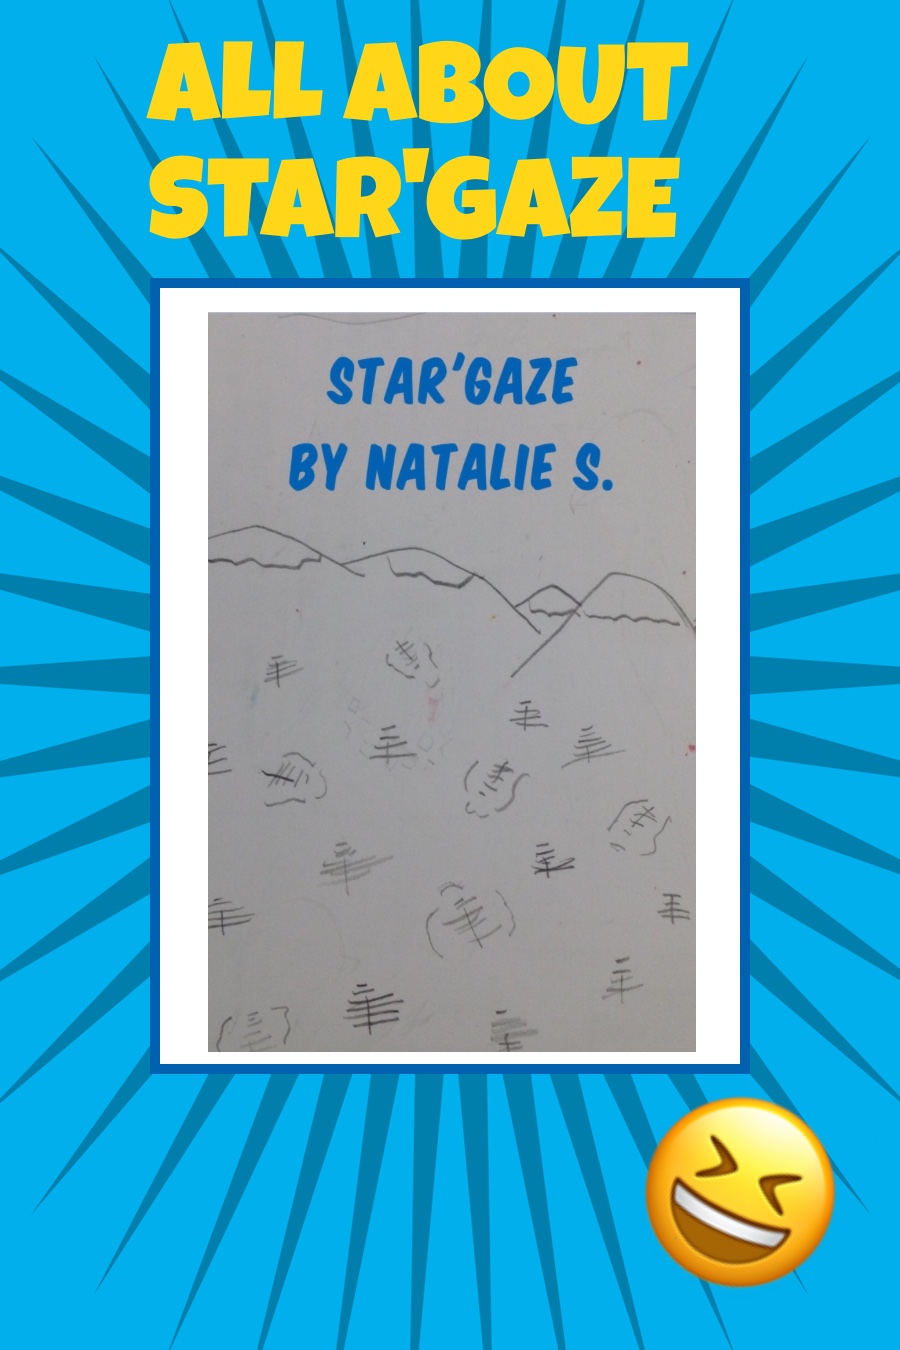 All About Star’Gaze by Natalie S